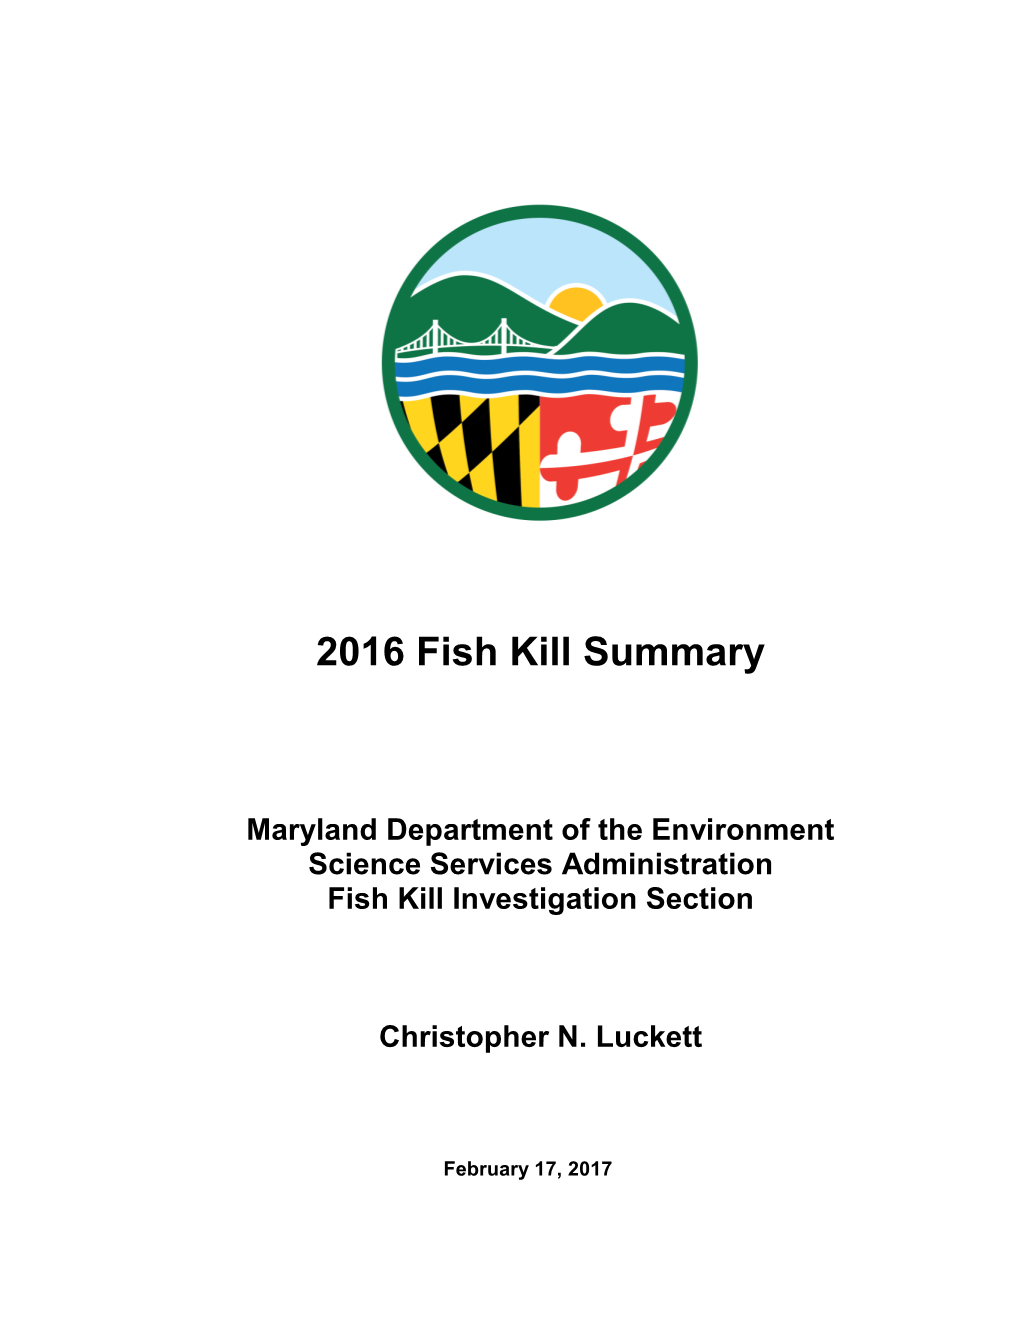 This Report Contains a Summary of Fish Kills Reported in Maryland In